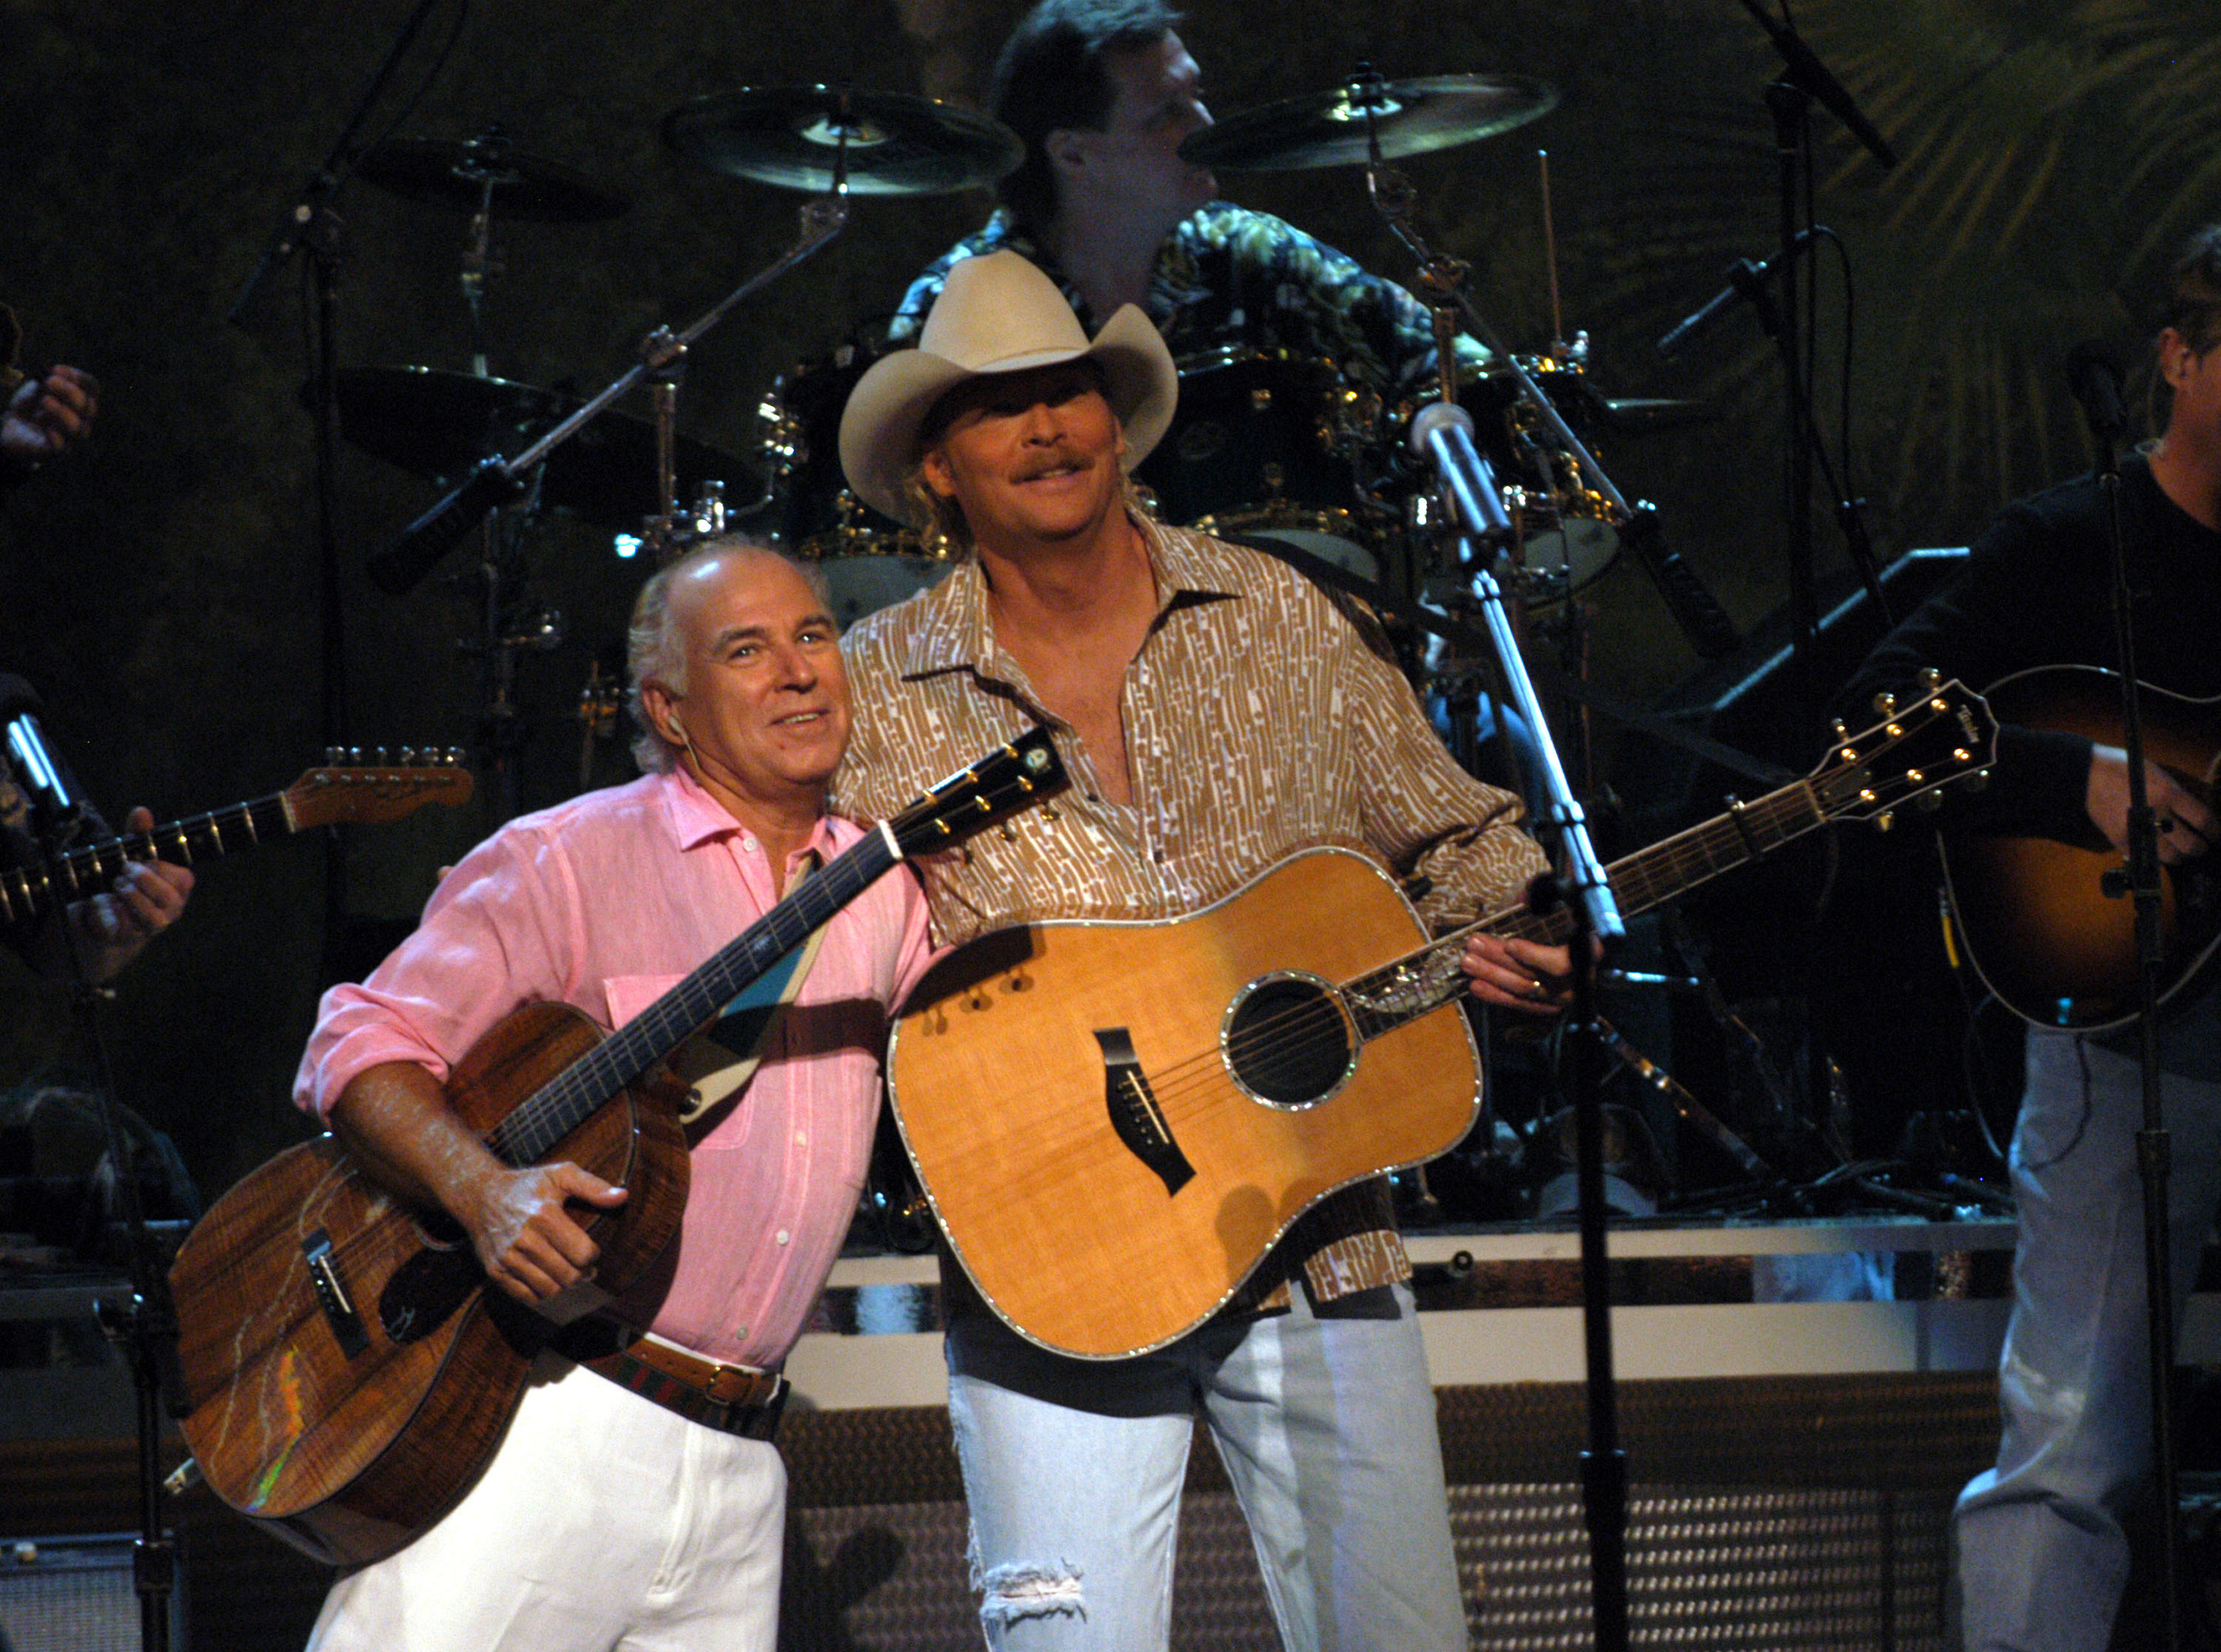 Jimmy Buffett and Alan Jackson perform the song "It's 5 O'Clock Somewhere" (